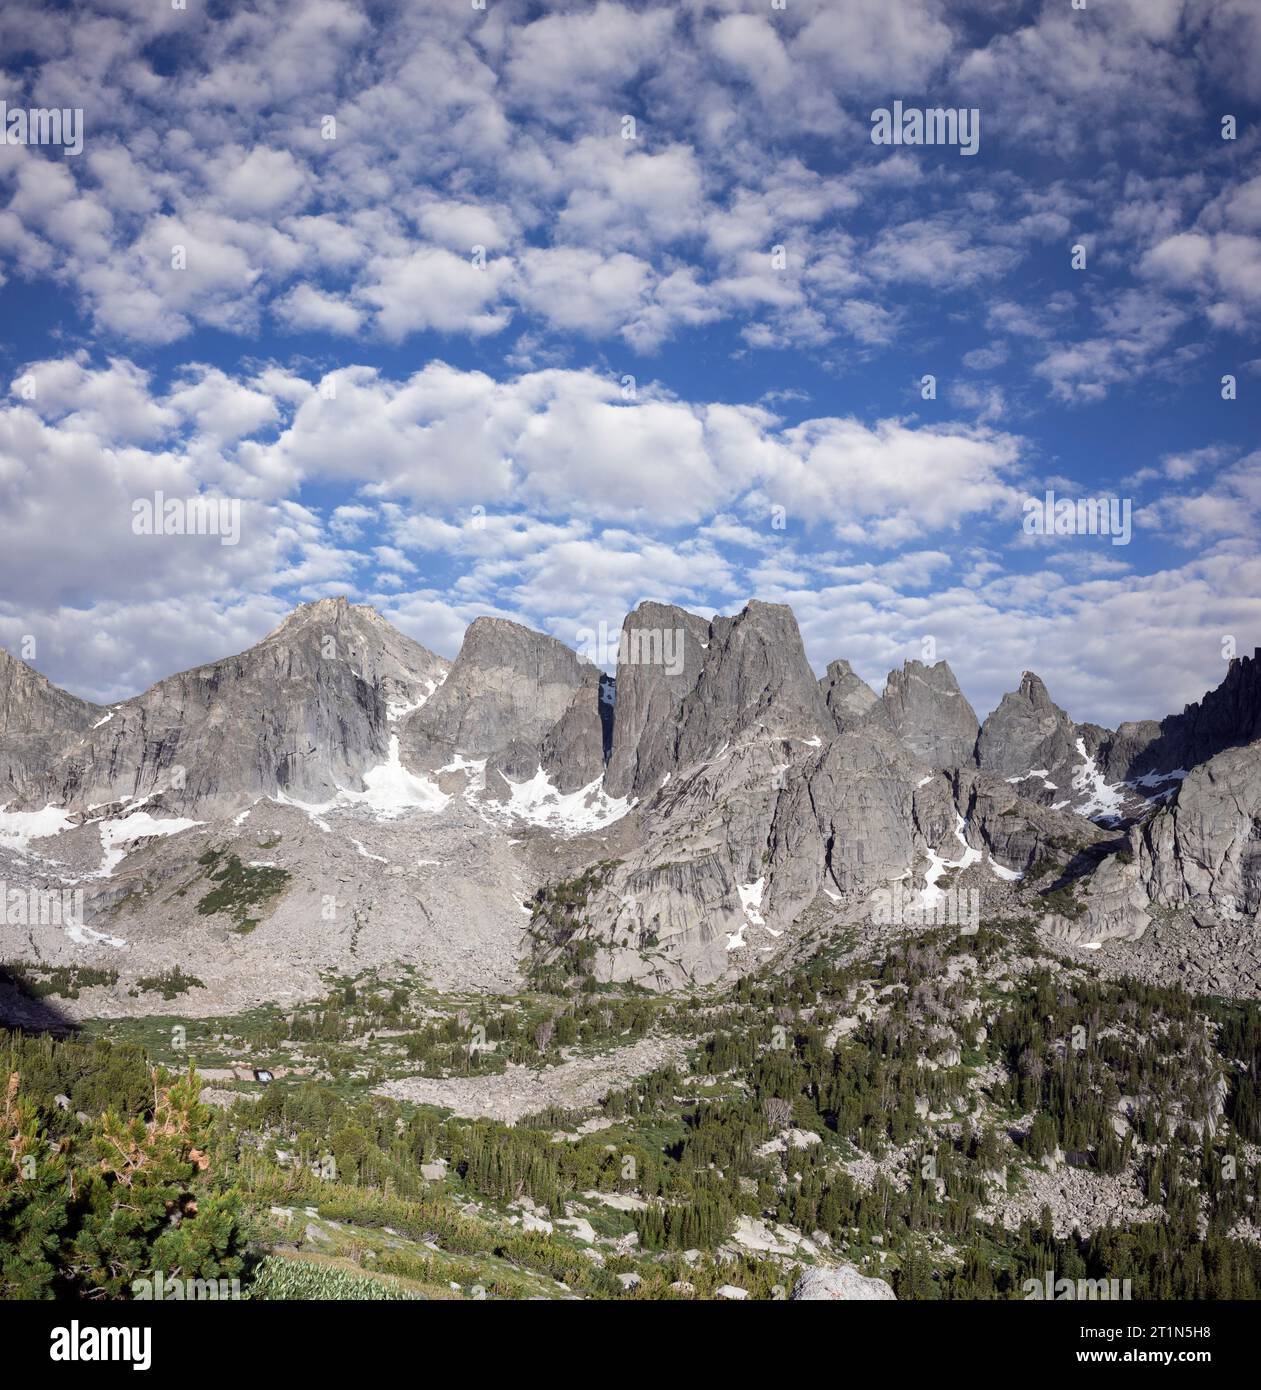 WY05449-00....WYOMING - Cirque of the Towers vom Jackass Pass, Popo Agie Wilderness, Shoshone National Forest. Stockfoto